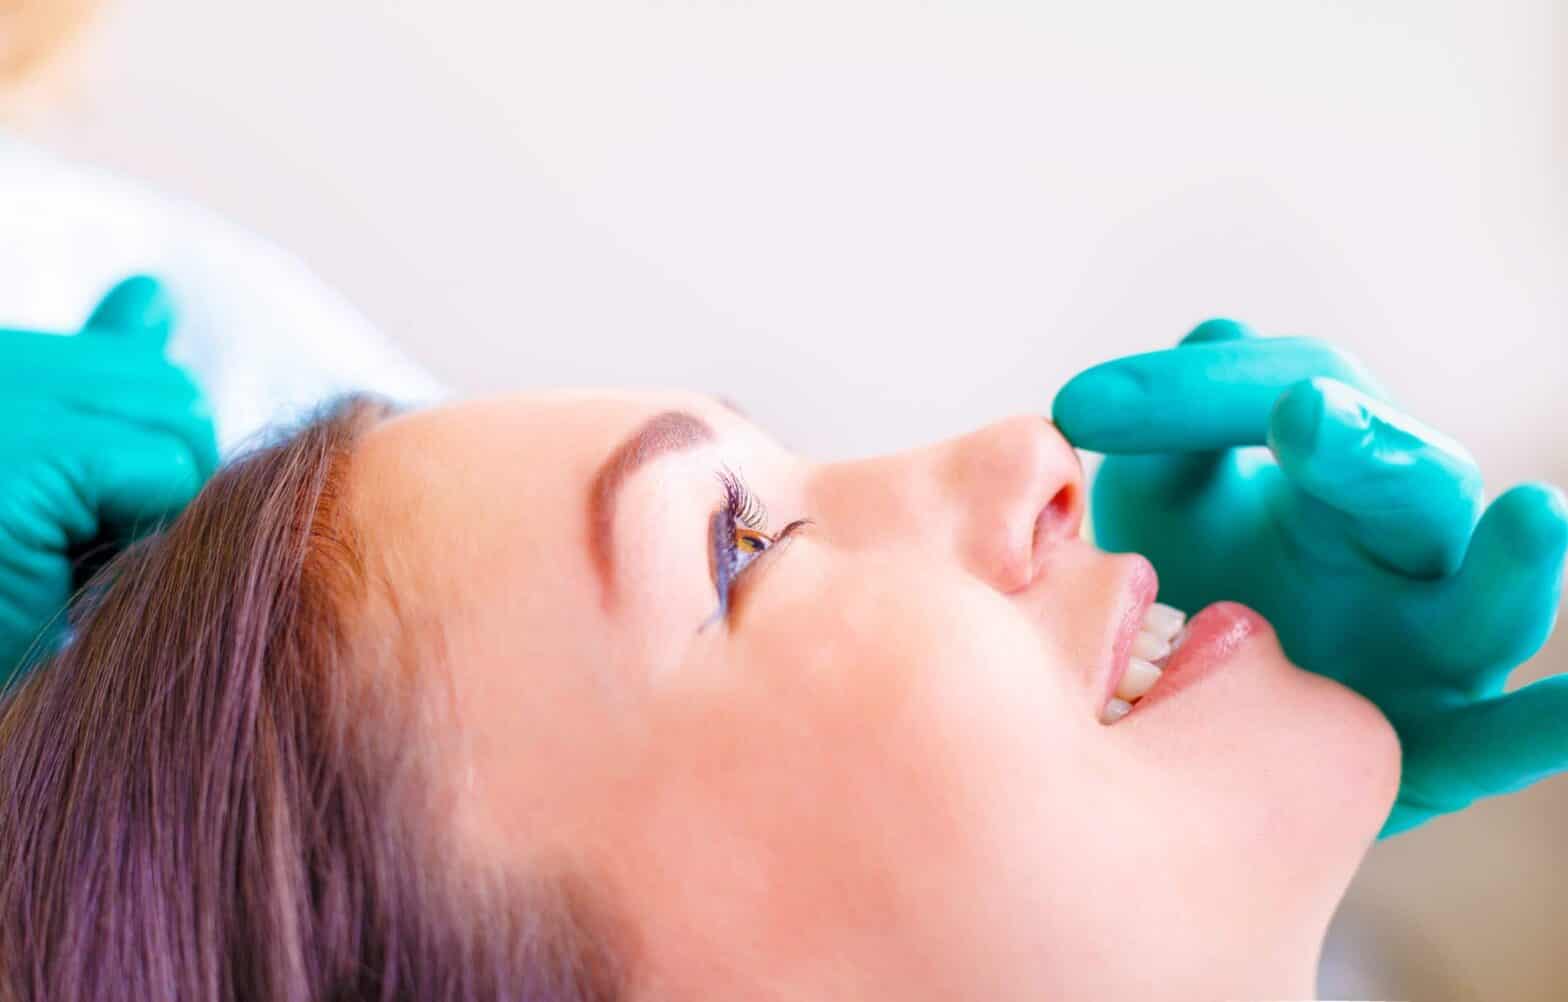 HOW LONG DOES IT TAKE TO RECOVER FROM RHINOPLASTY SURGERY?